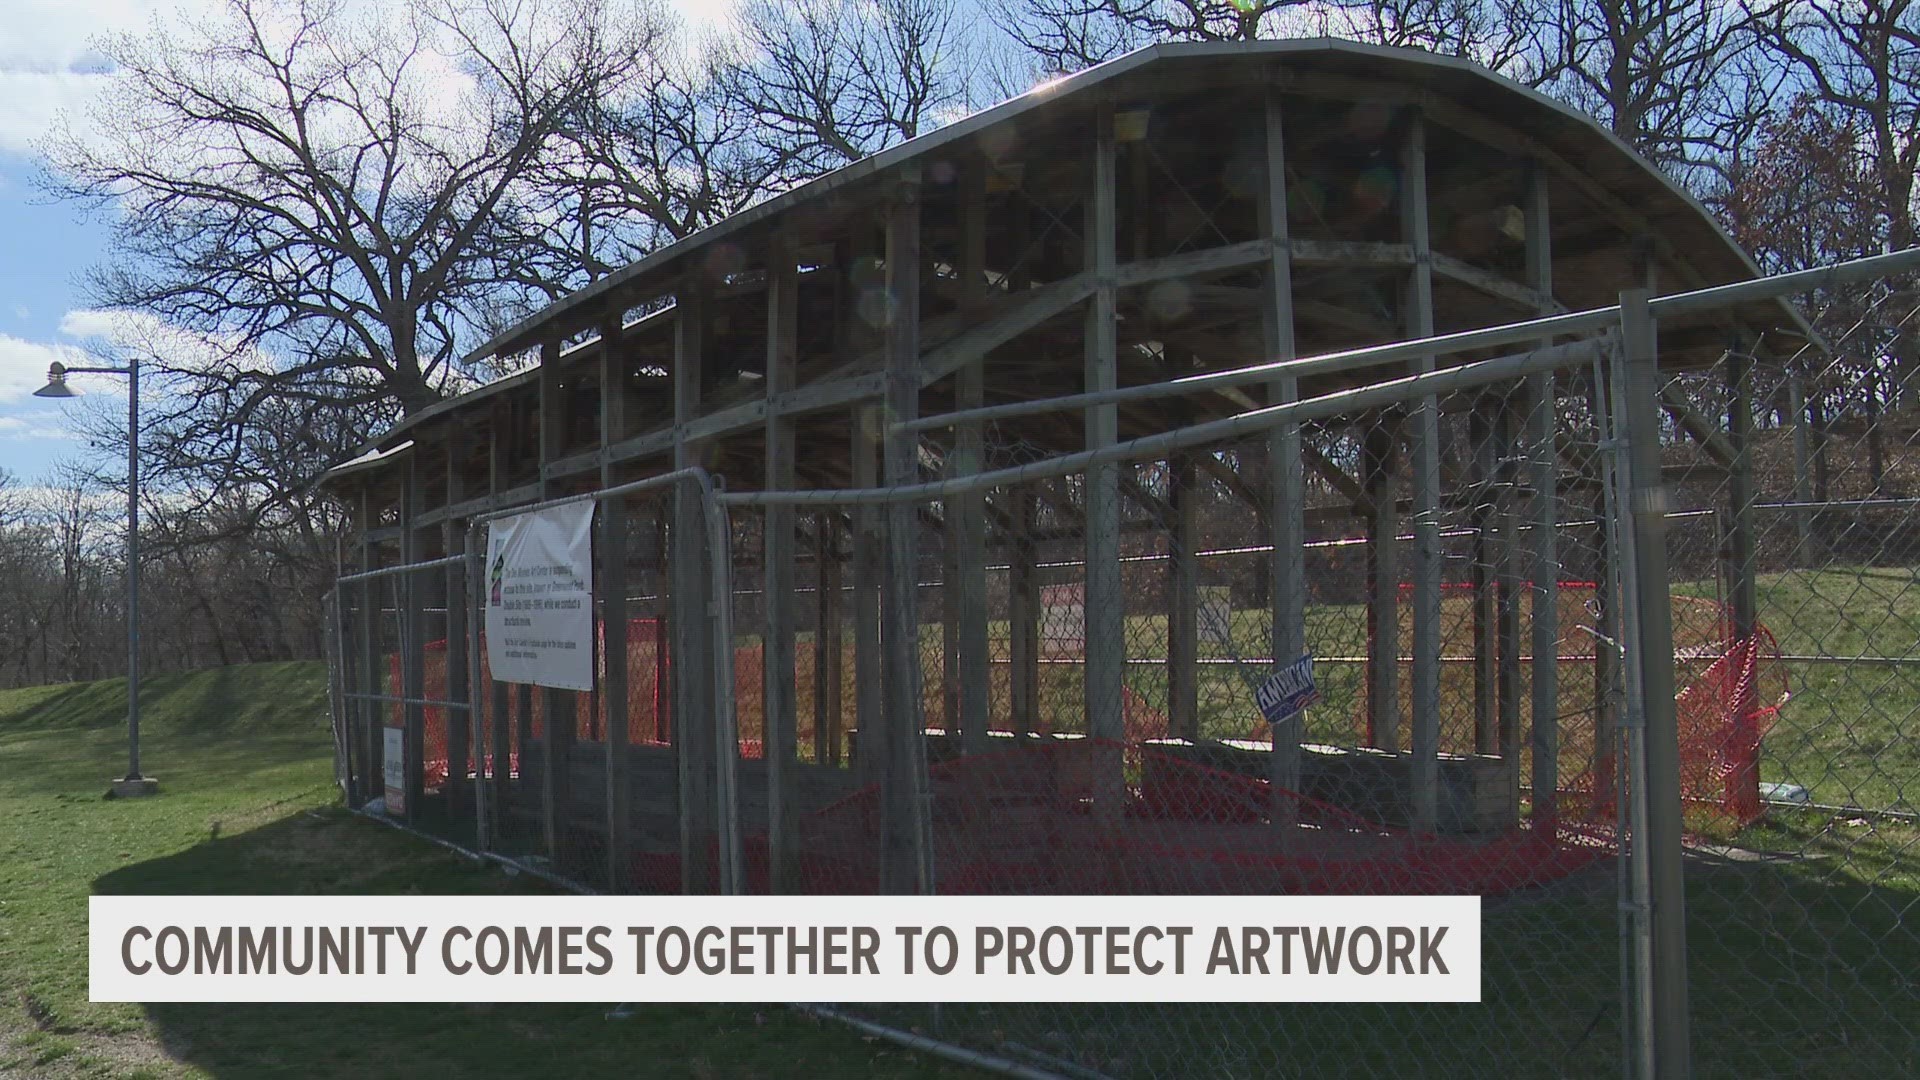 The Des Moines Art Center announced its plans to remove the piece early this year, which was met criticism.